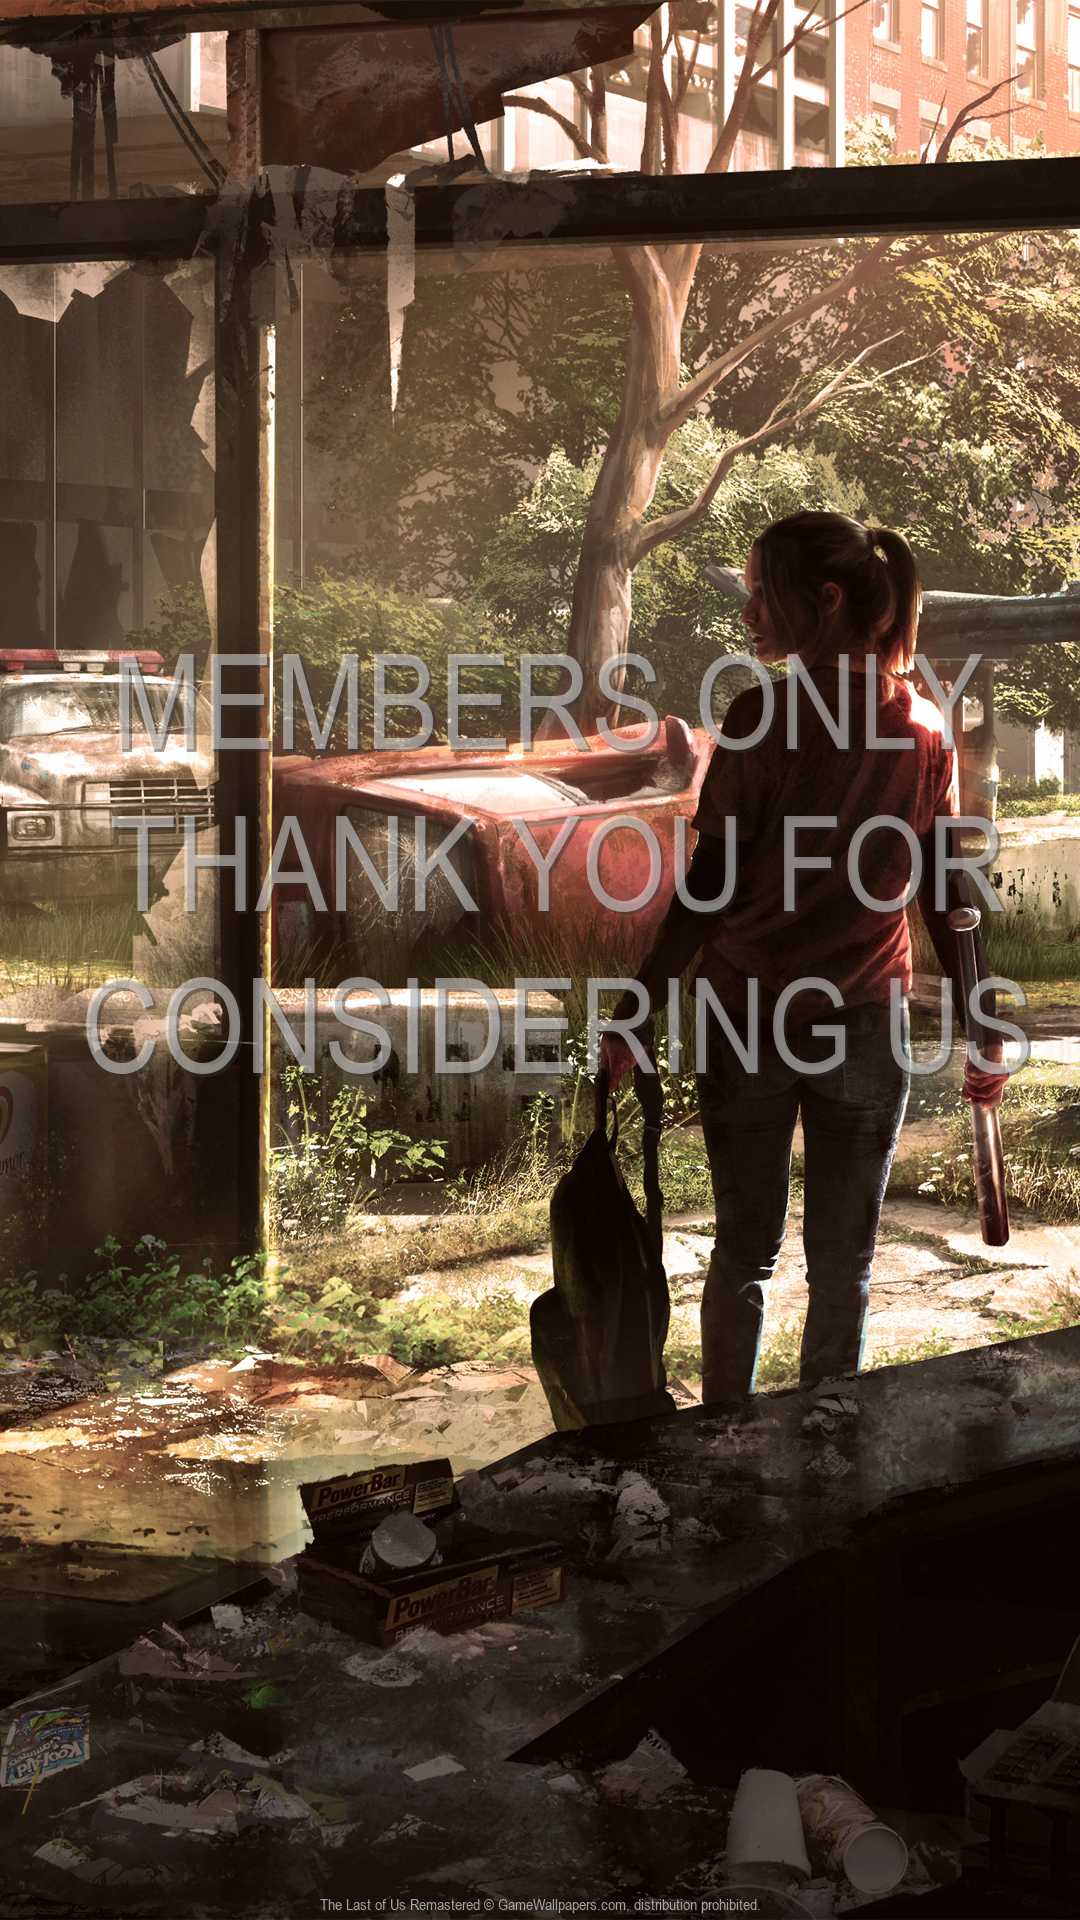 The Last of Us: Remastered 1080p Vertical Mobile fond d'cran 02